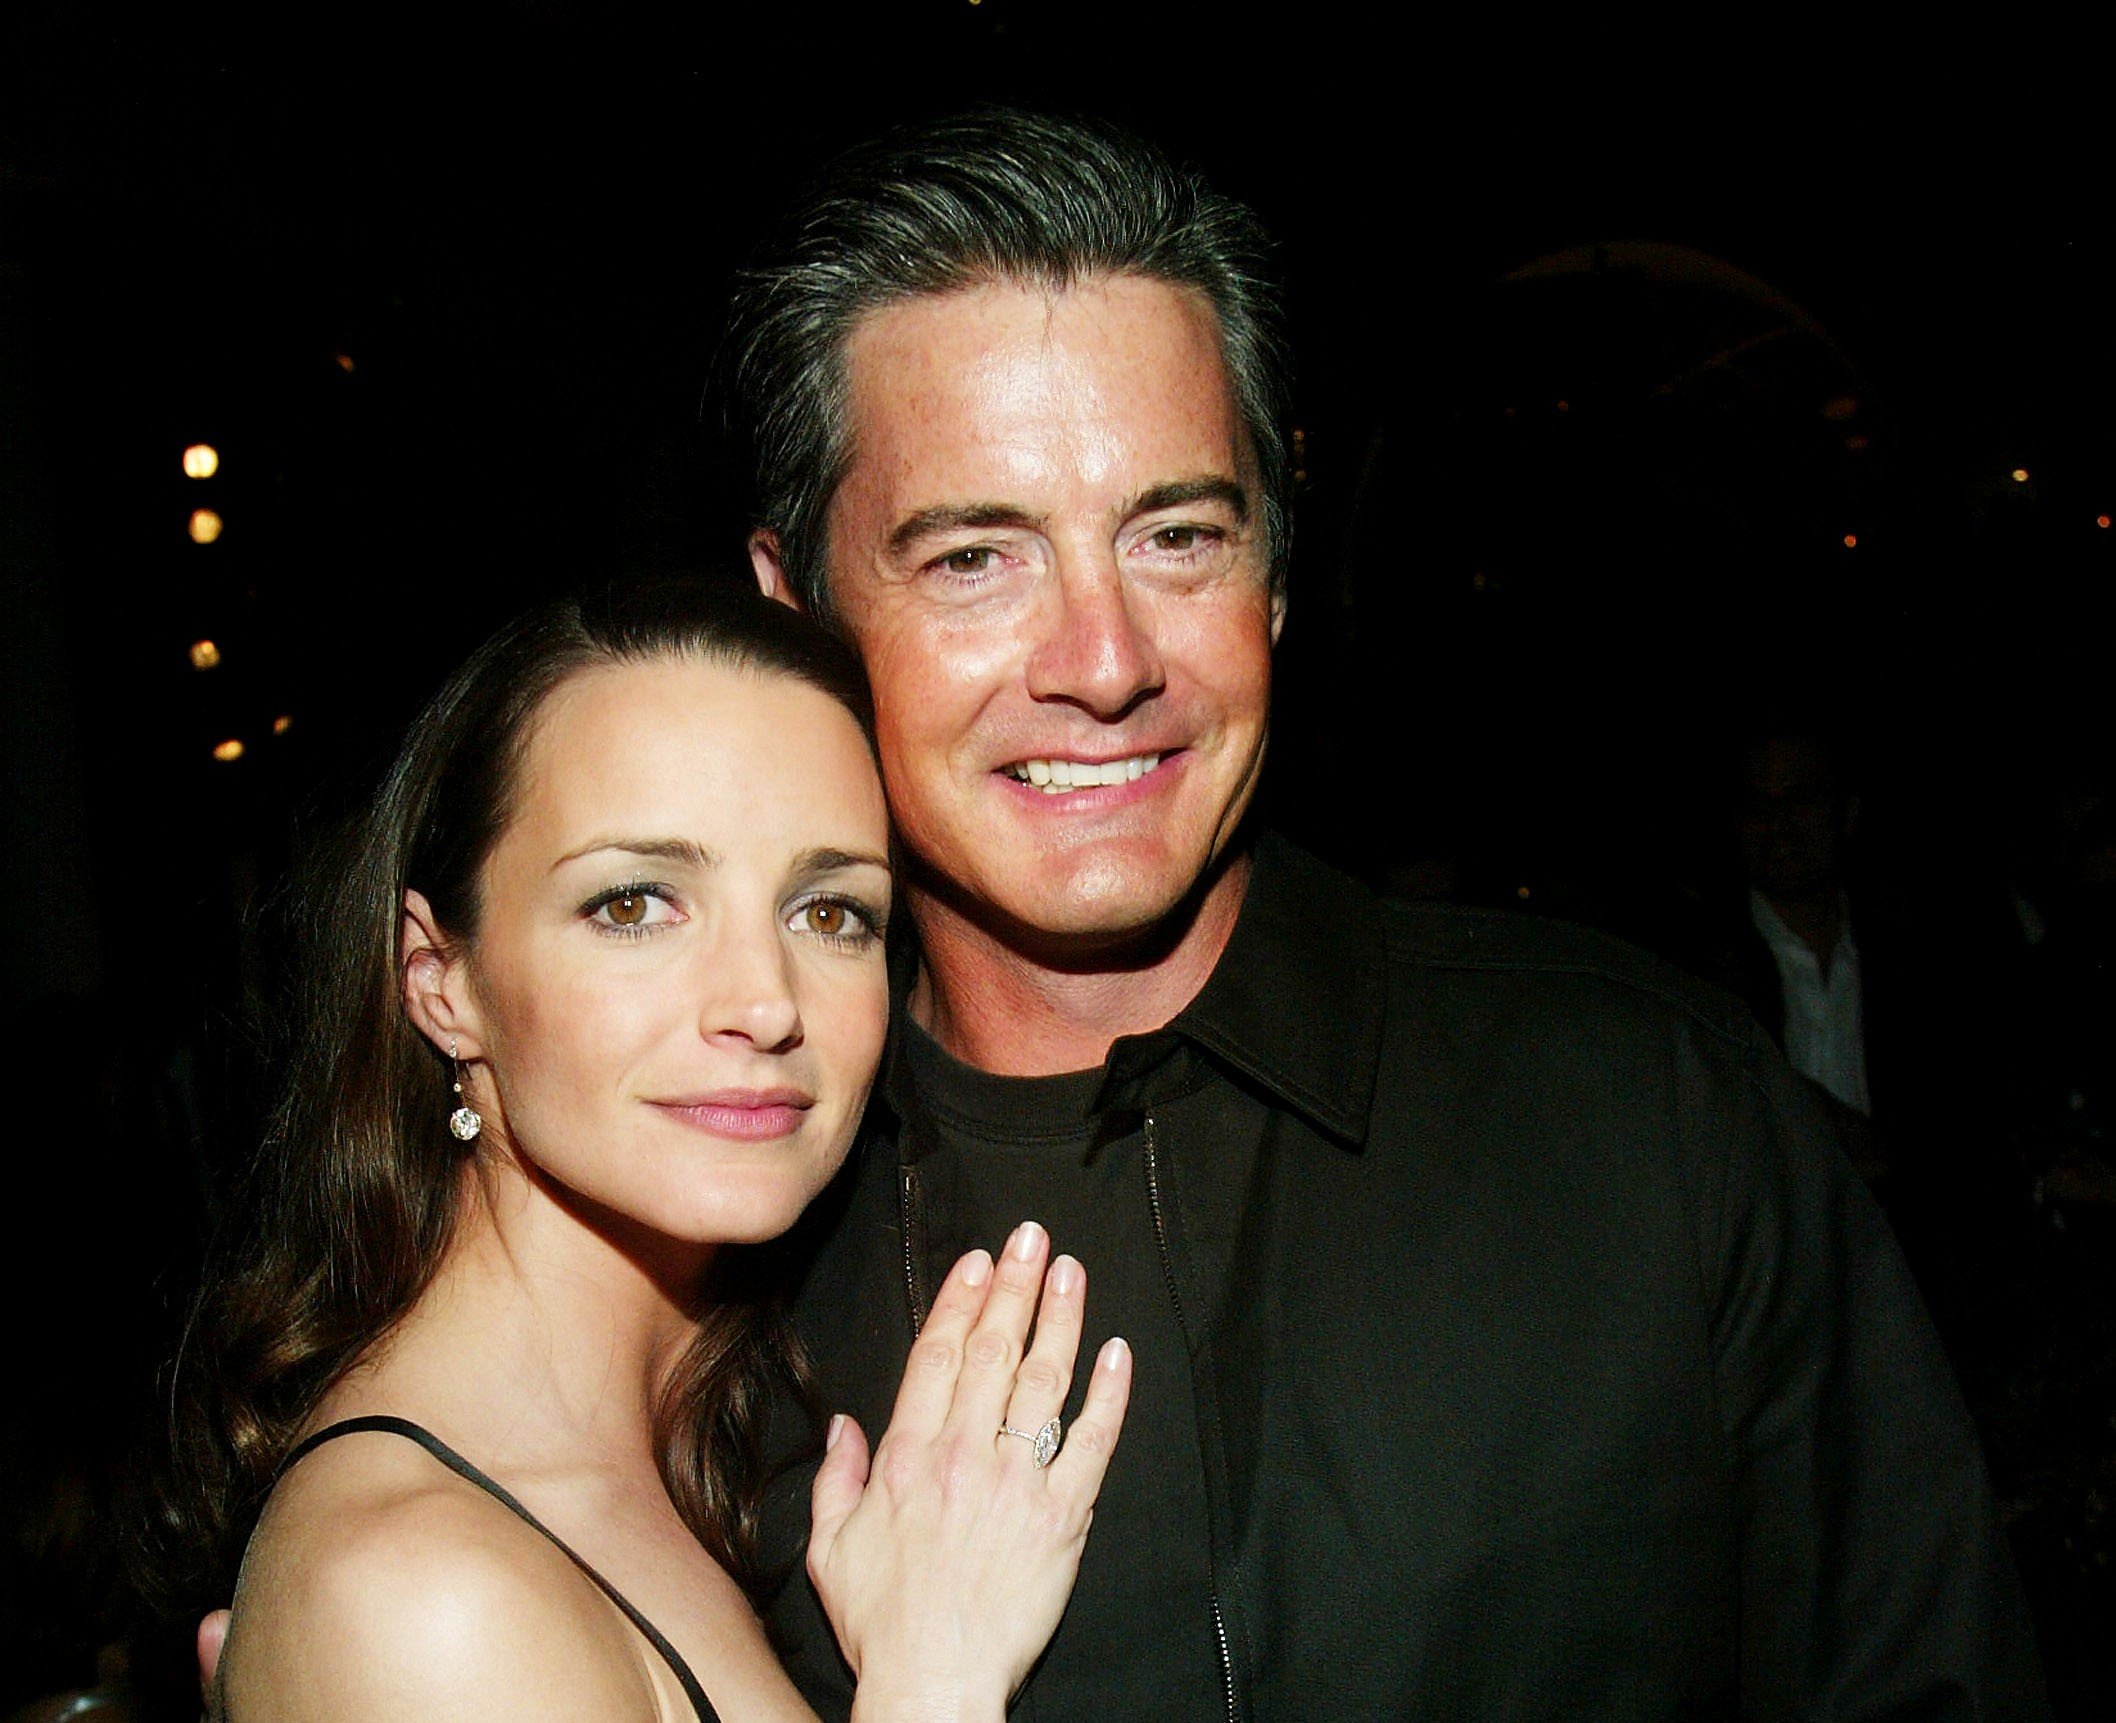 Kristin Davis and Kyle MacLachlan attend the 'Sex and the City' season premiere